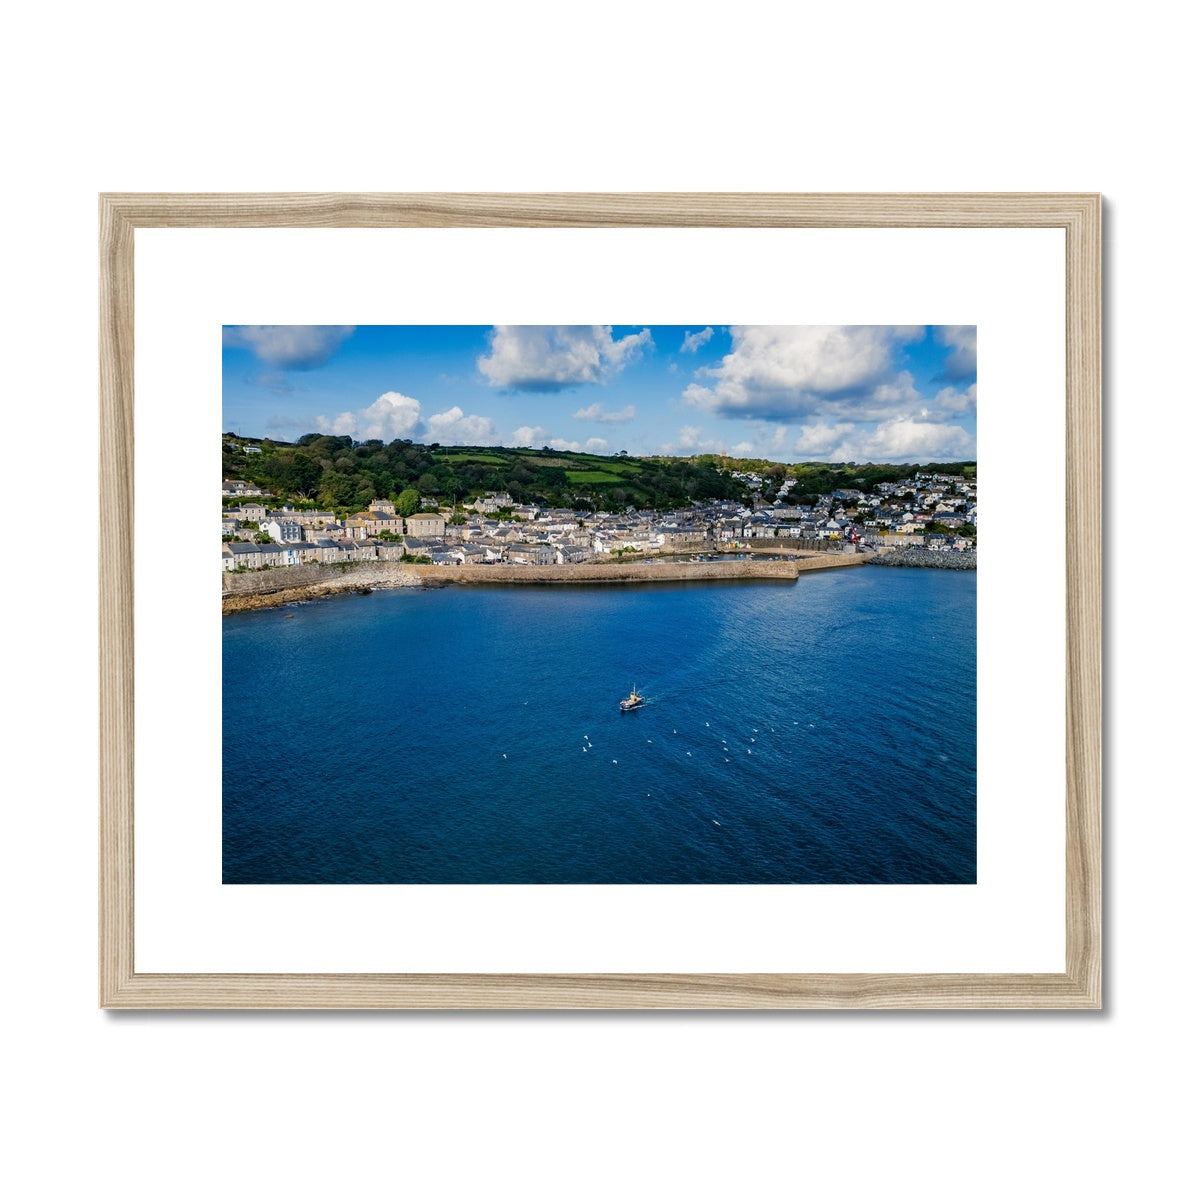 mousehole fishing boat wooden frame